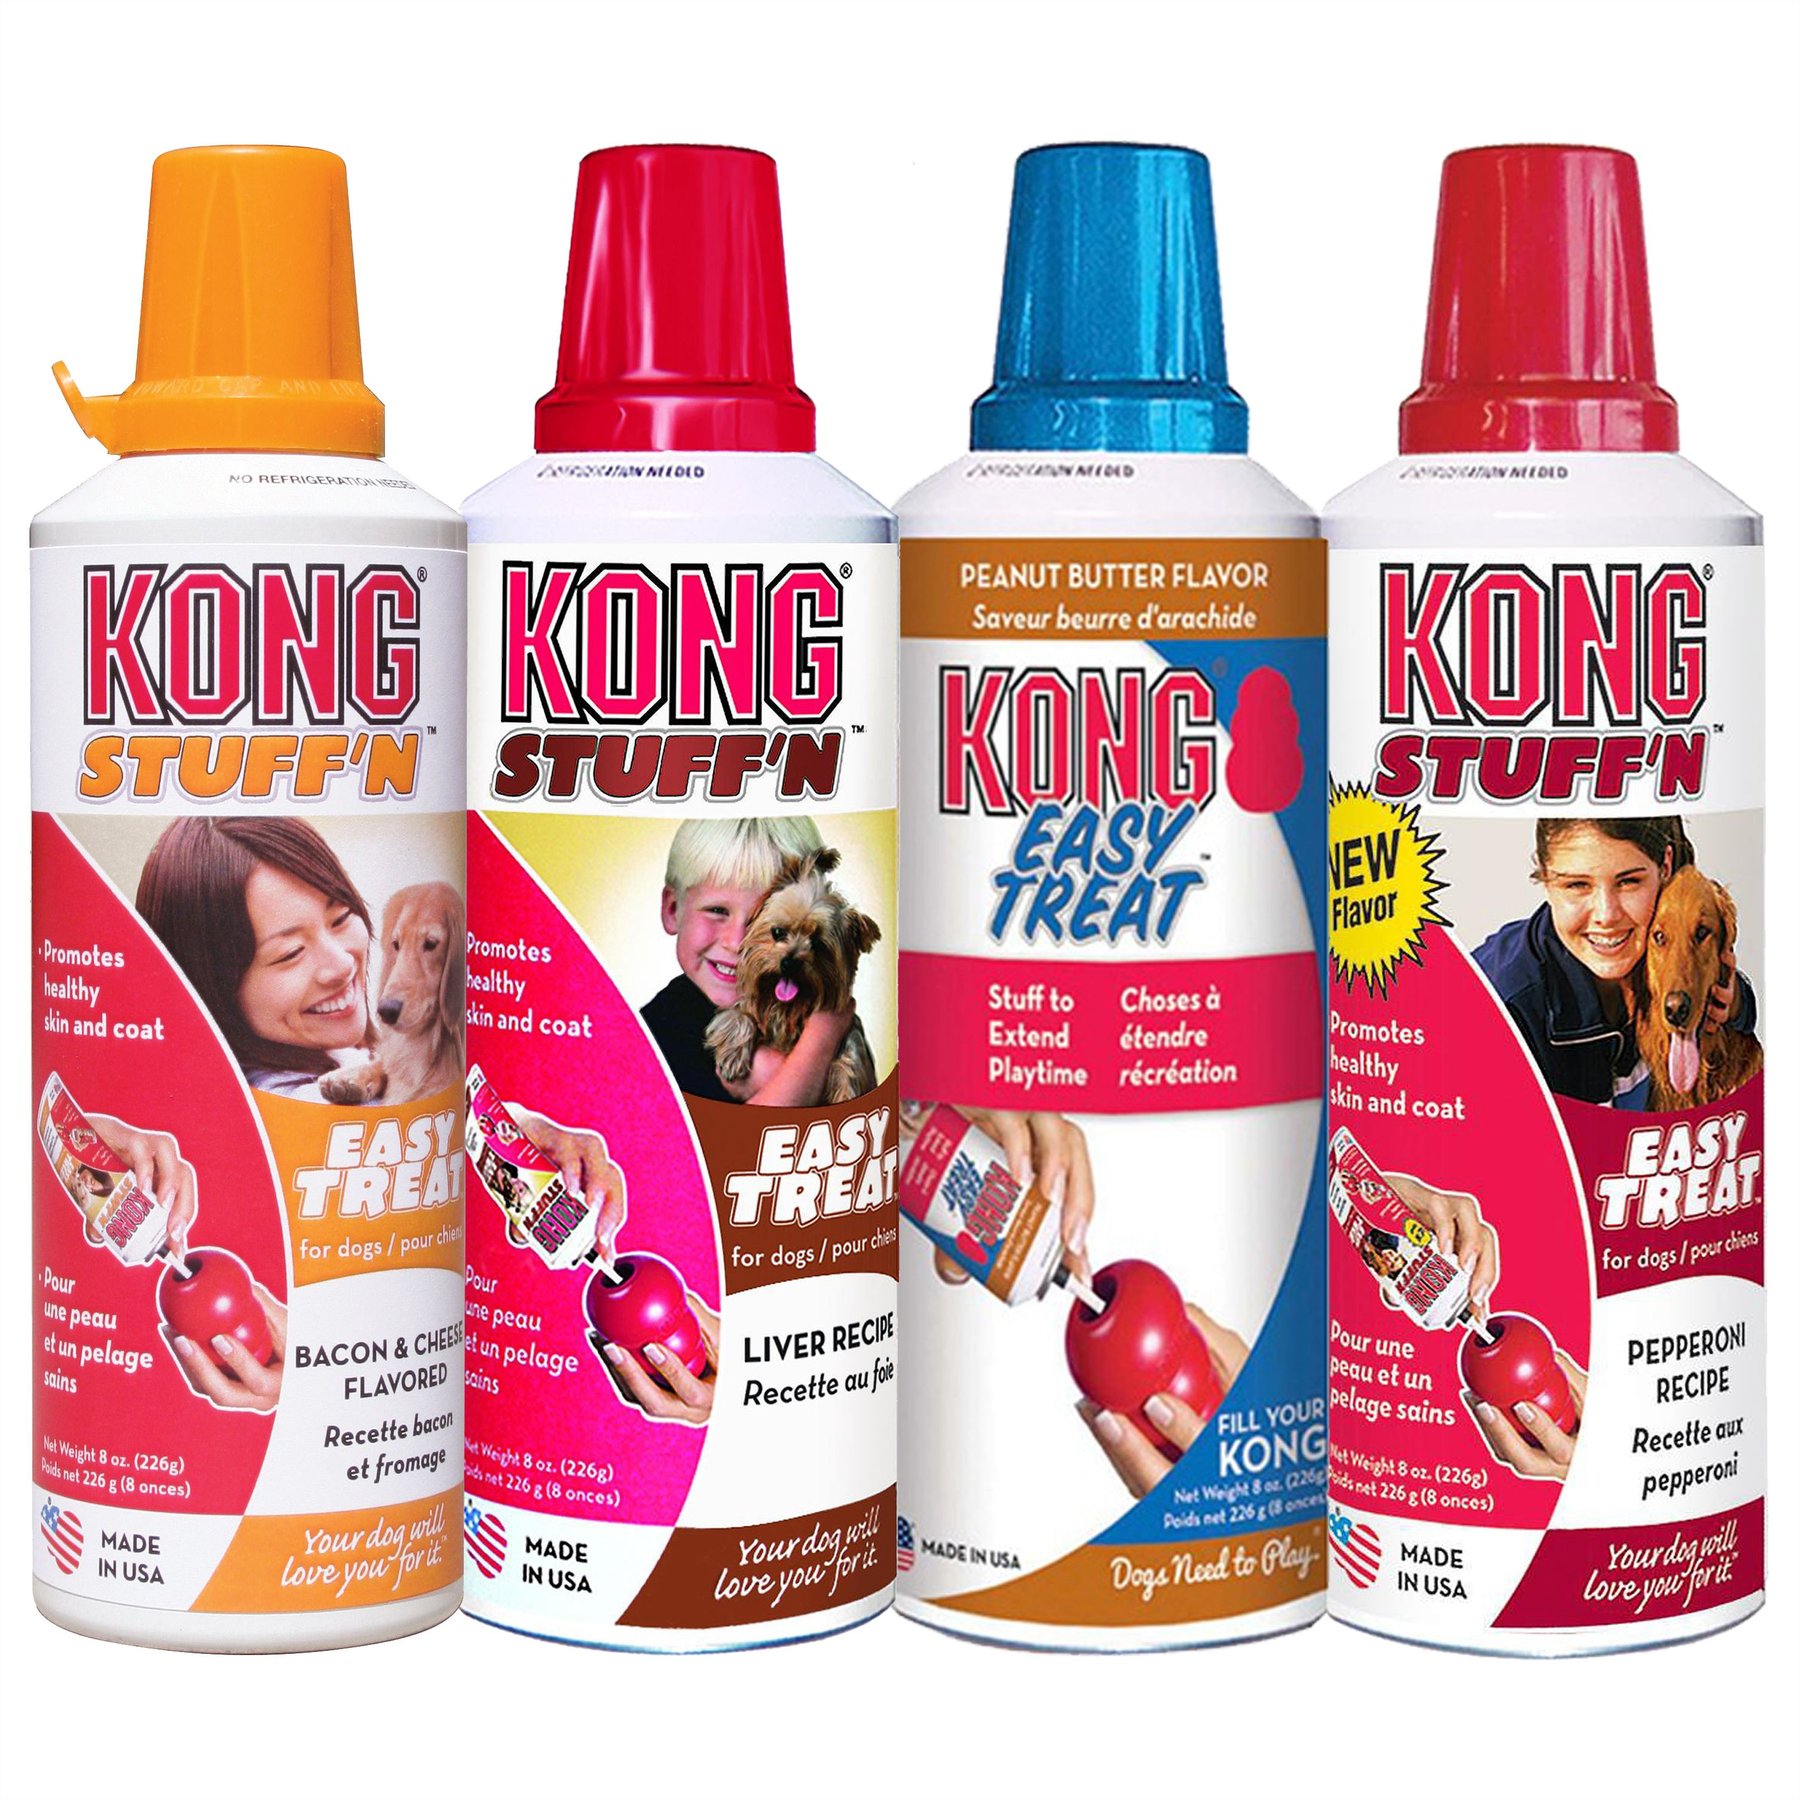 KONG Liver Easy Treat - Miscota United States of America